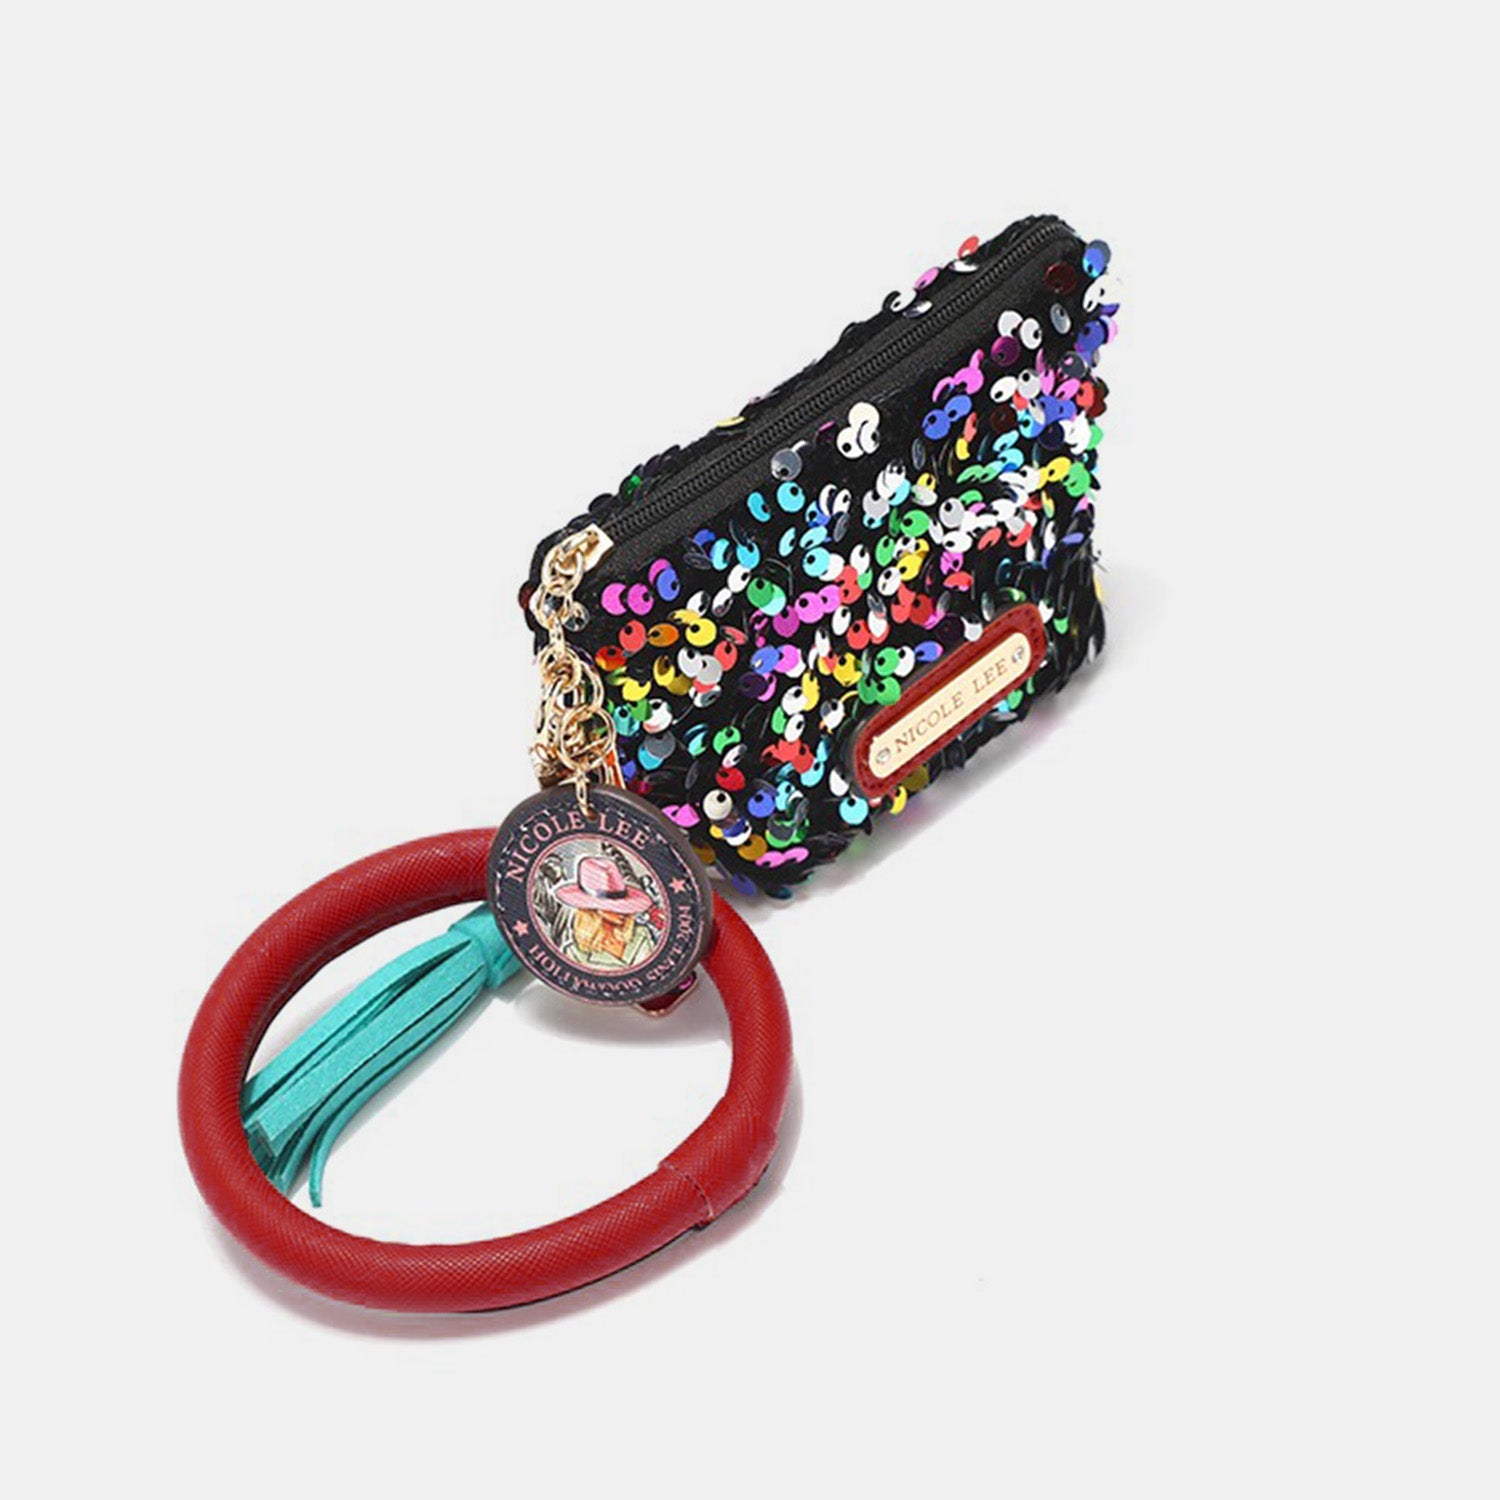 Sequined Vegan Leather Keychain Pouch in BlackPouchNicole Lee USA